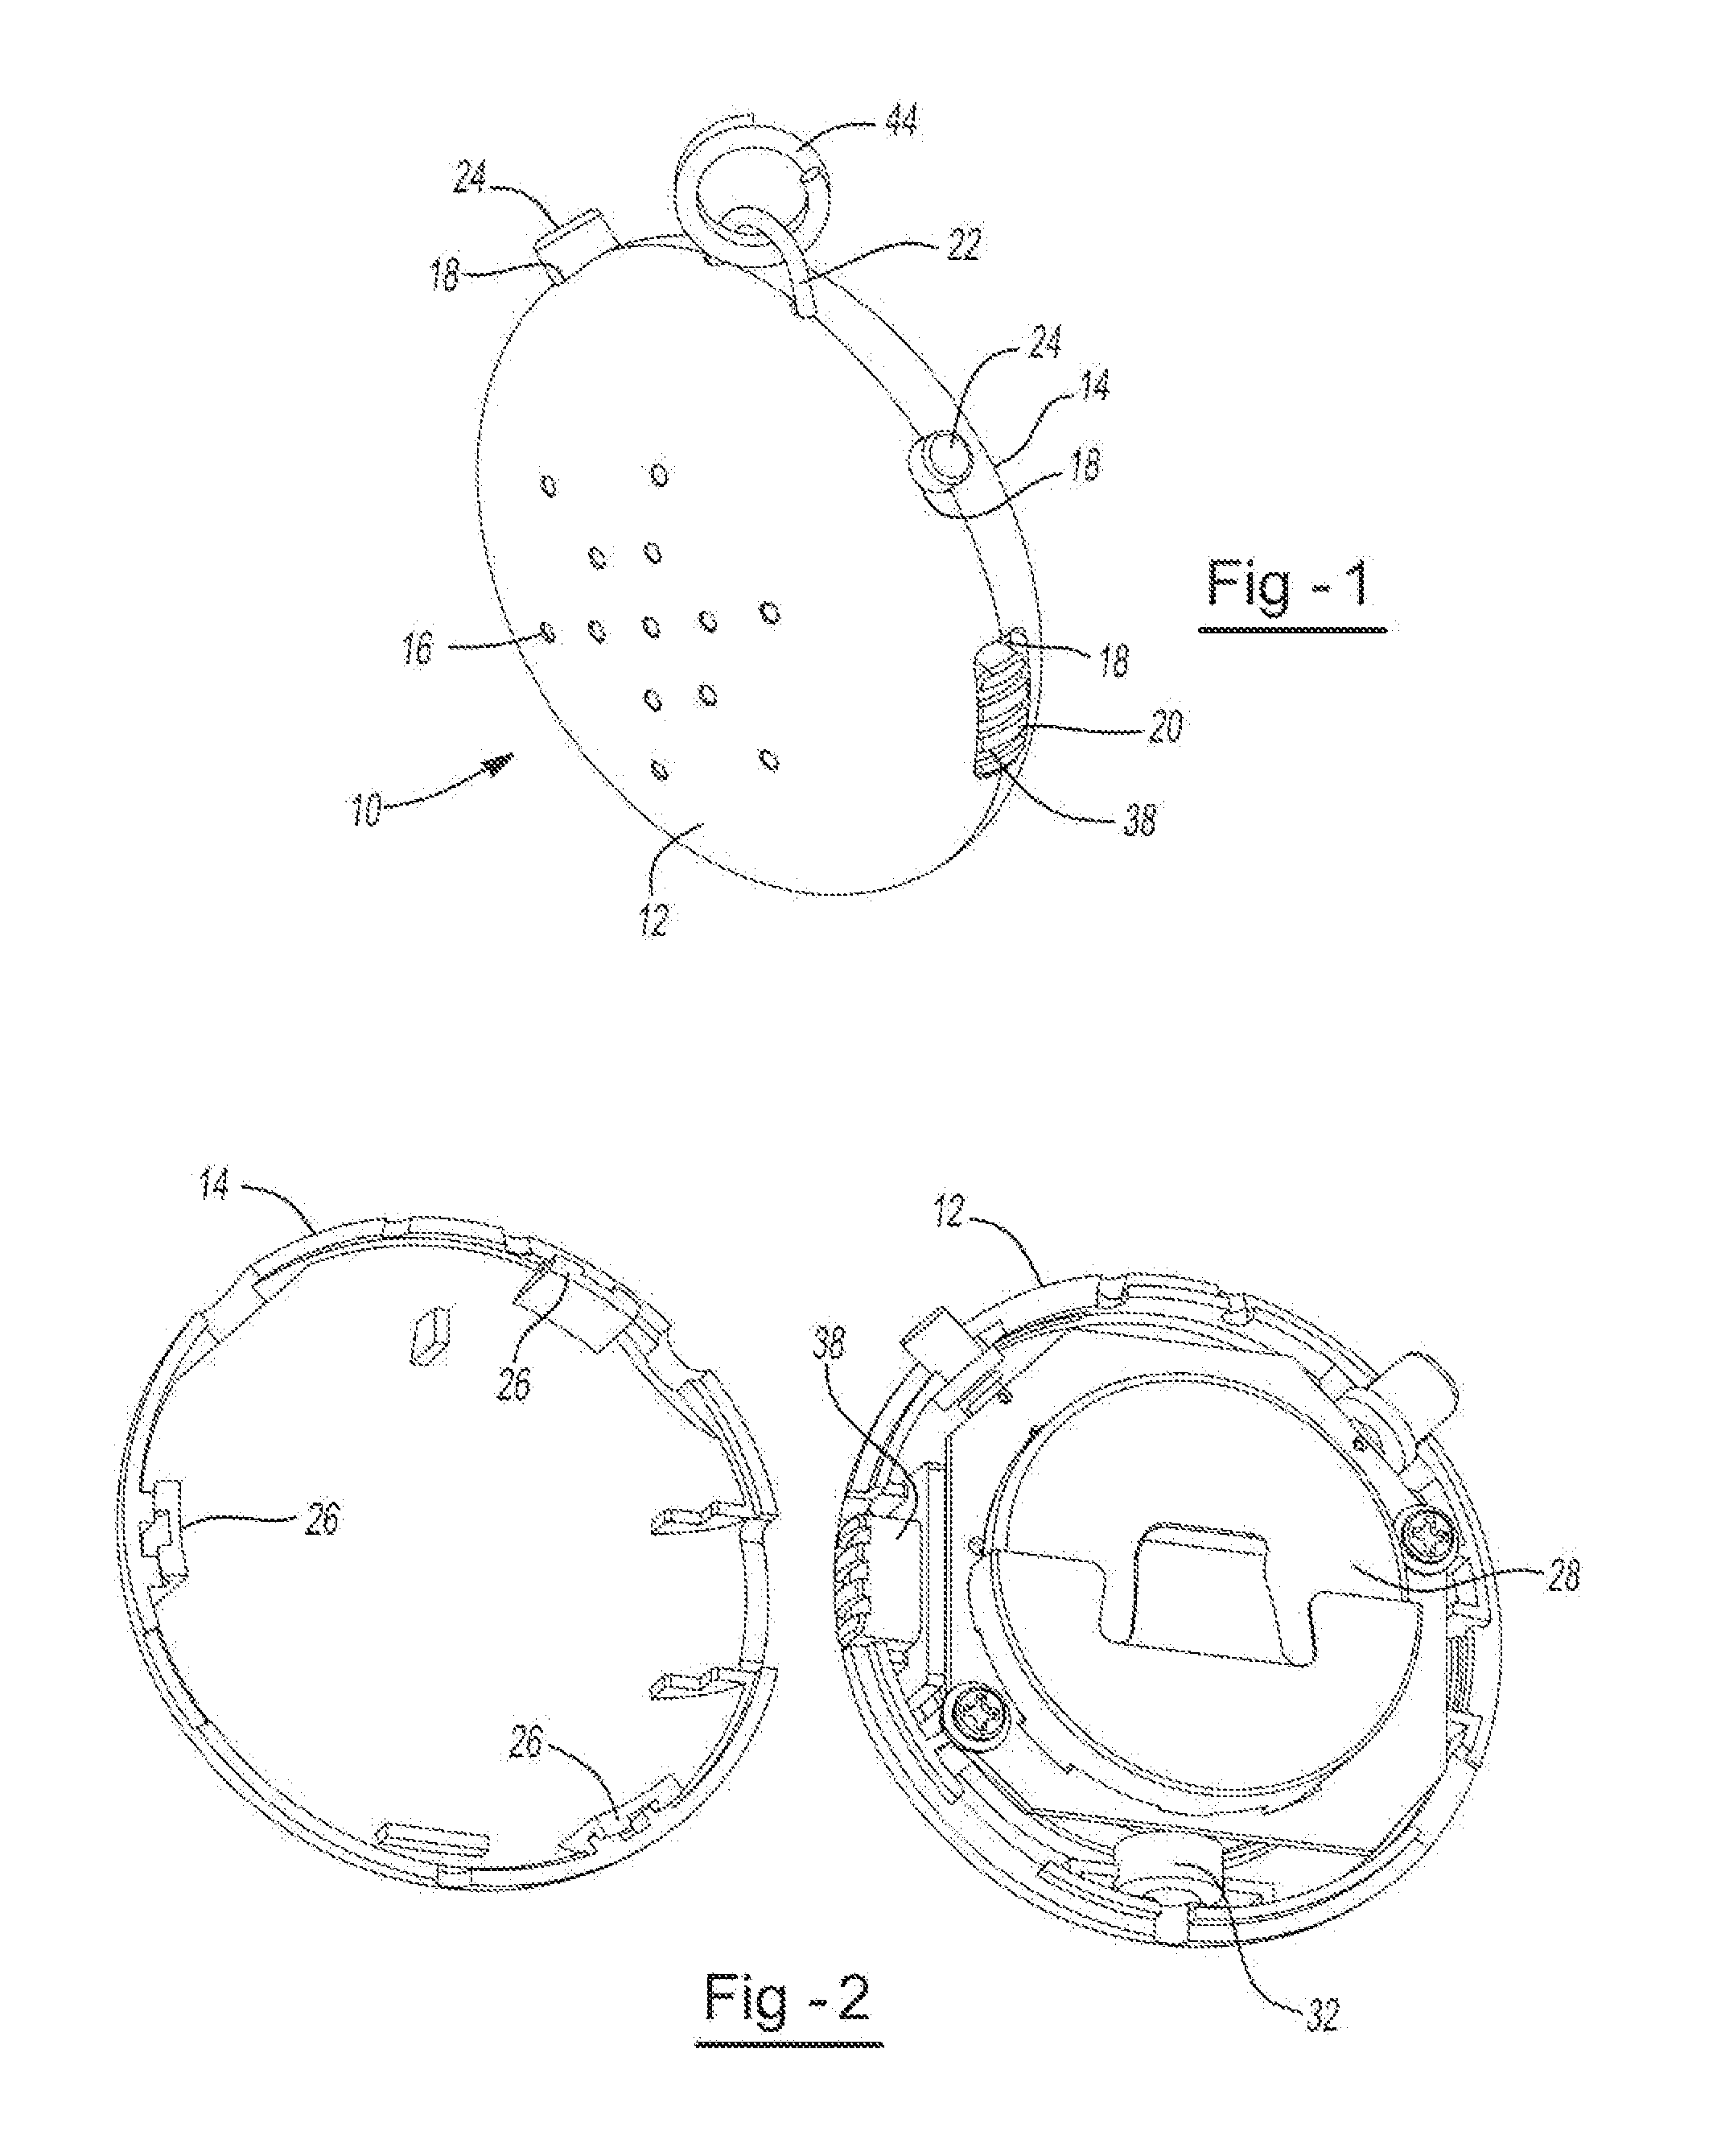 Sound recordable/playable device, packaging, and method of use